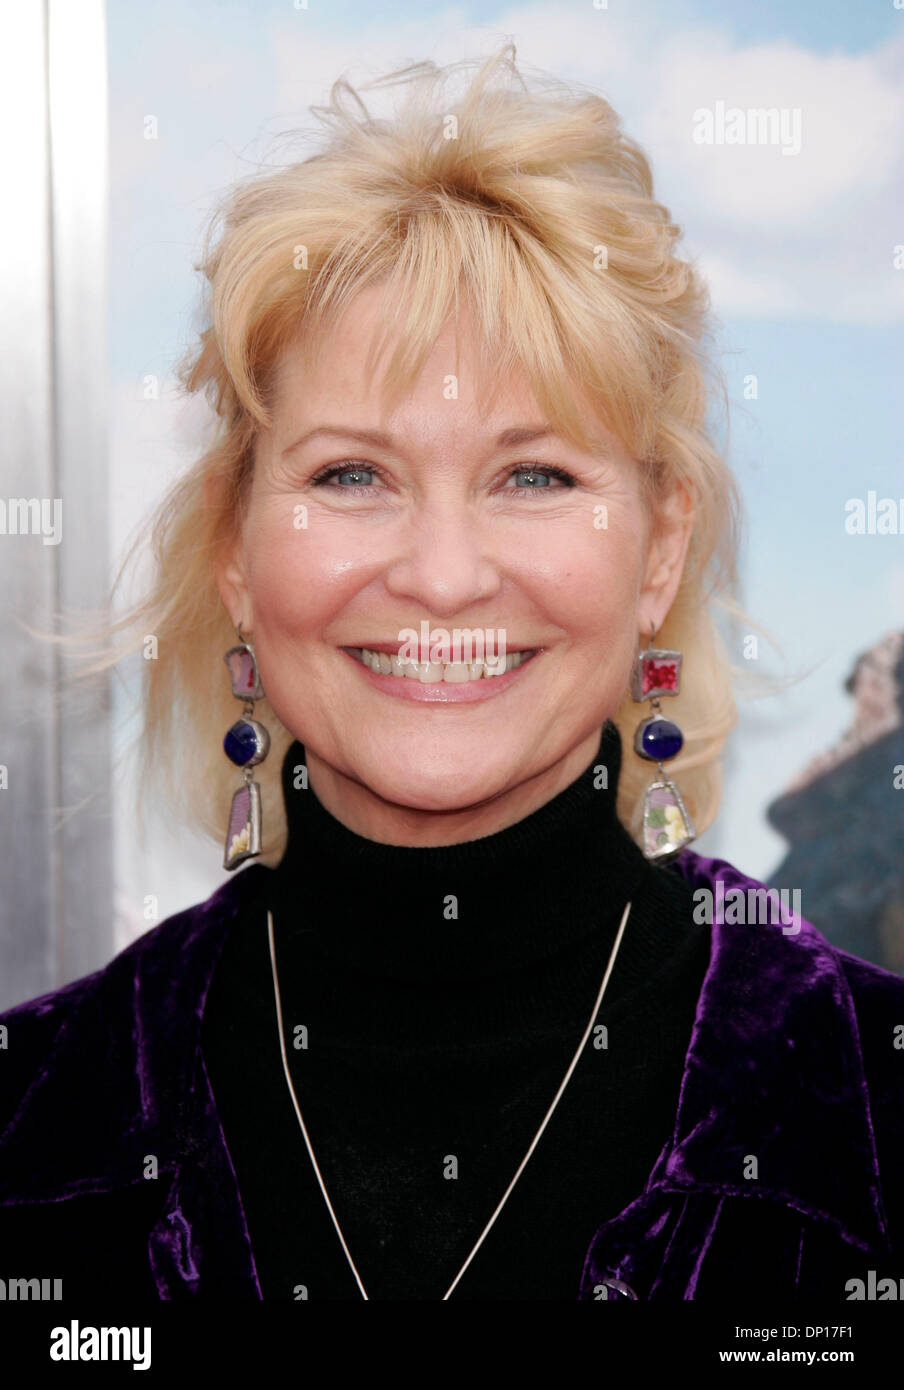 Apr 23, 2006; Westwood, California, USA; Actress DEE WALLACE-STONE at the 'RV' Los Angeles Premiere held at the Mann Village Theatre. Mandatory Credit: Photo by Lisa O'Connor/ZUMA Press. (©) Copyright 2006 by Lisa O'Connor Stock Photo